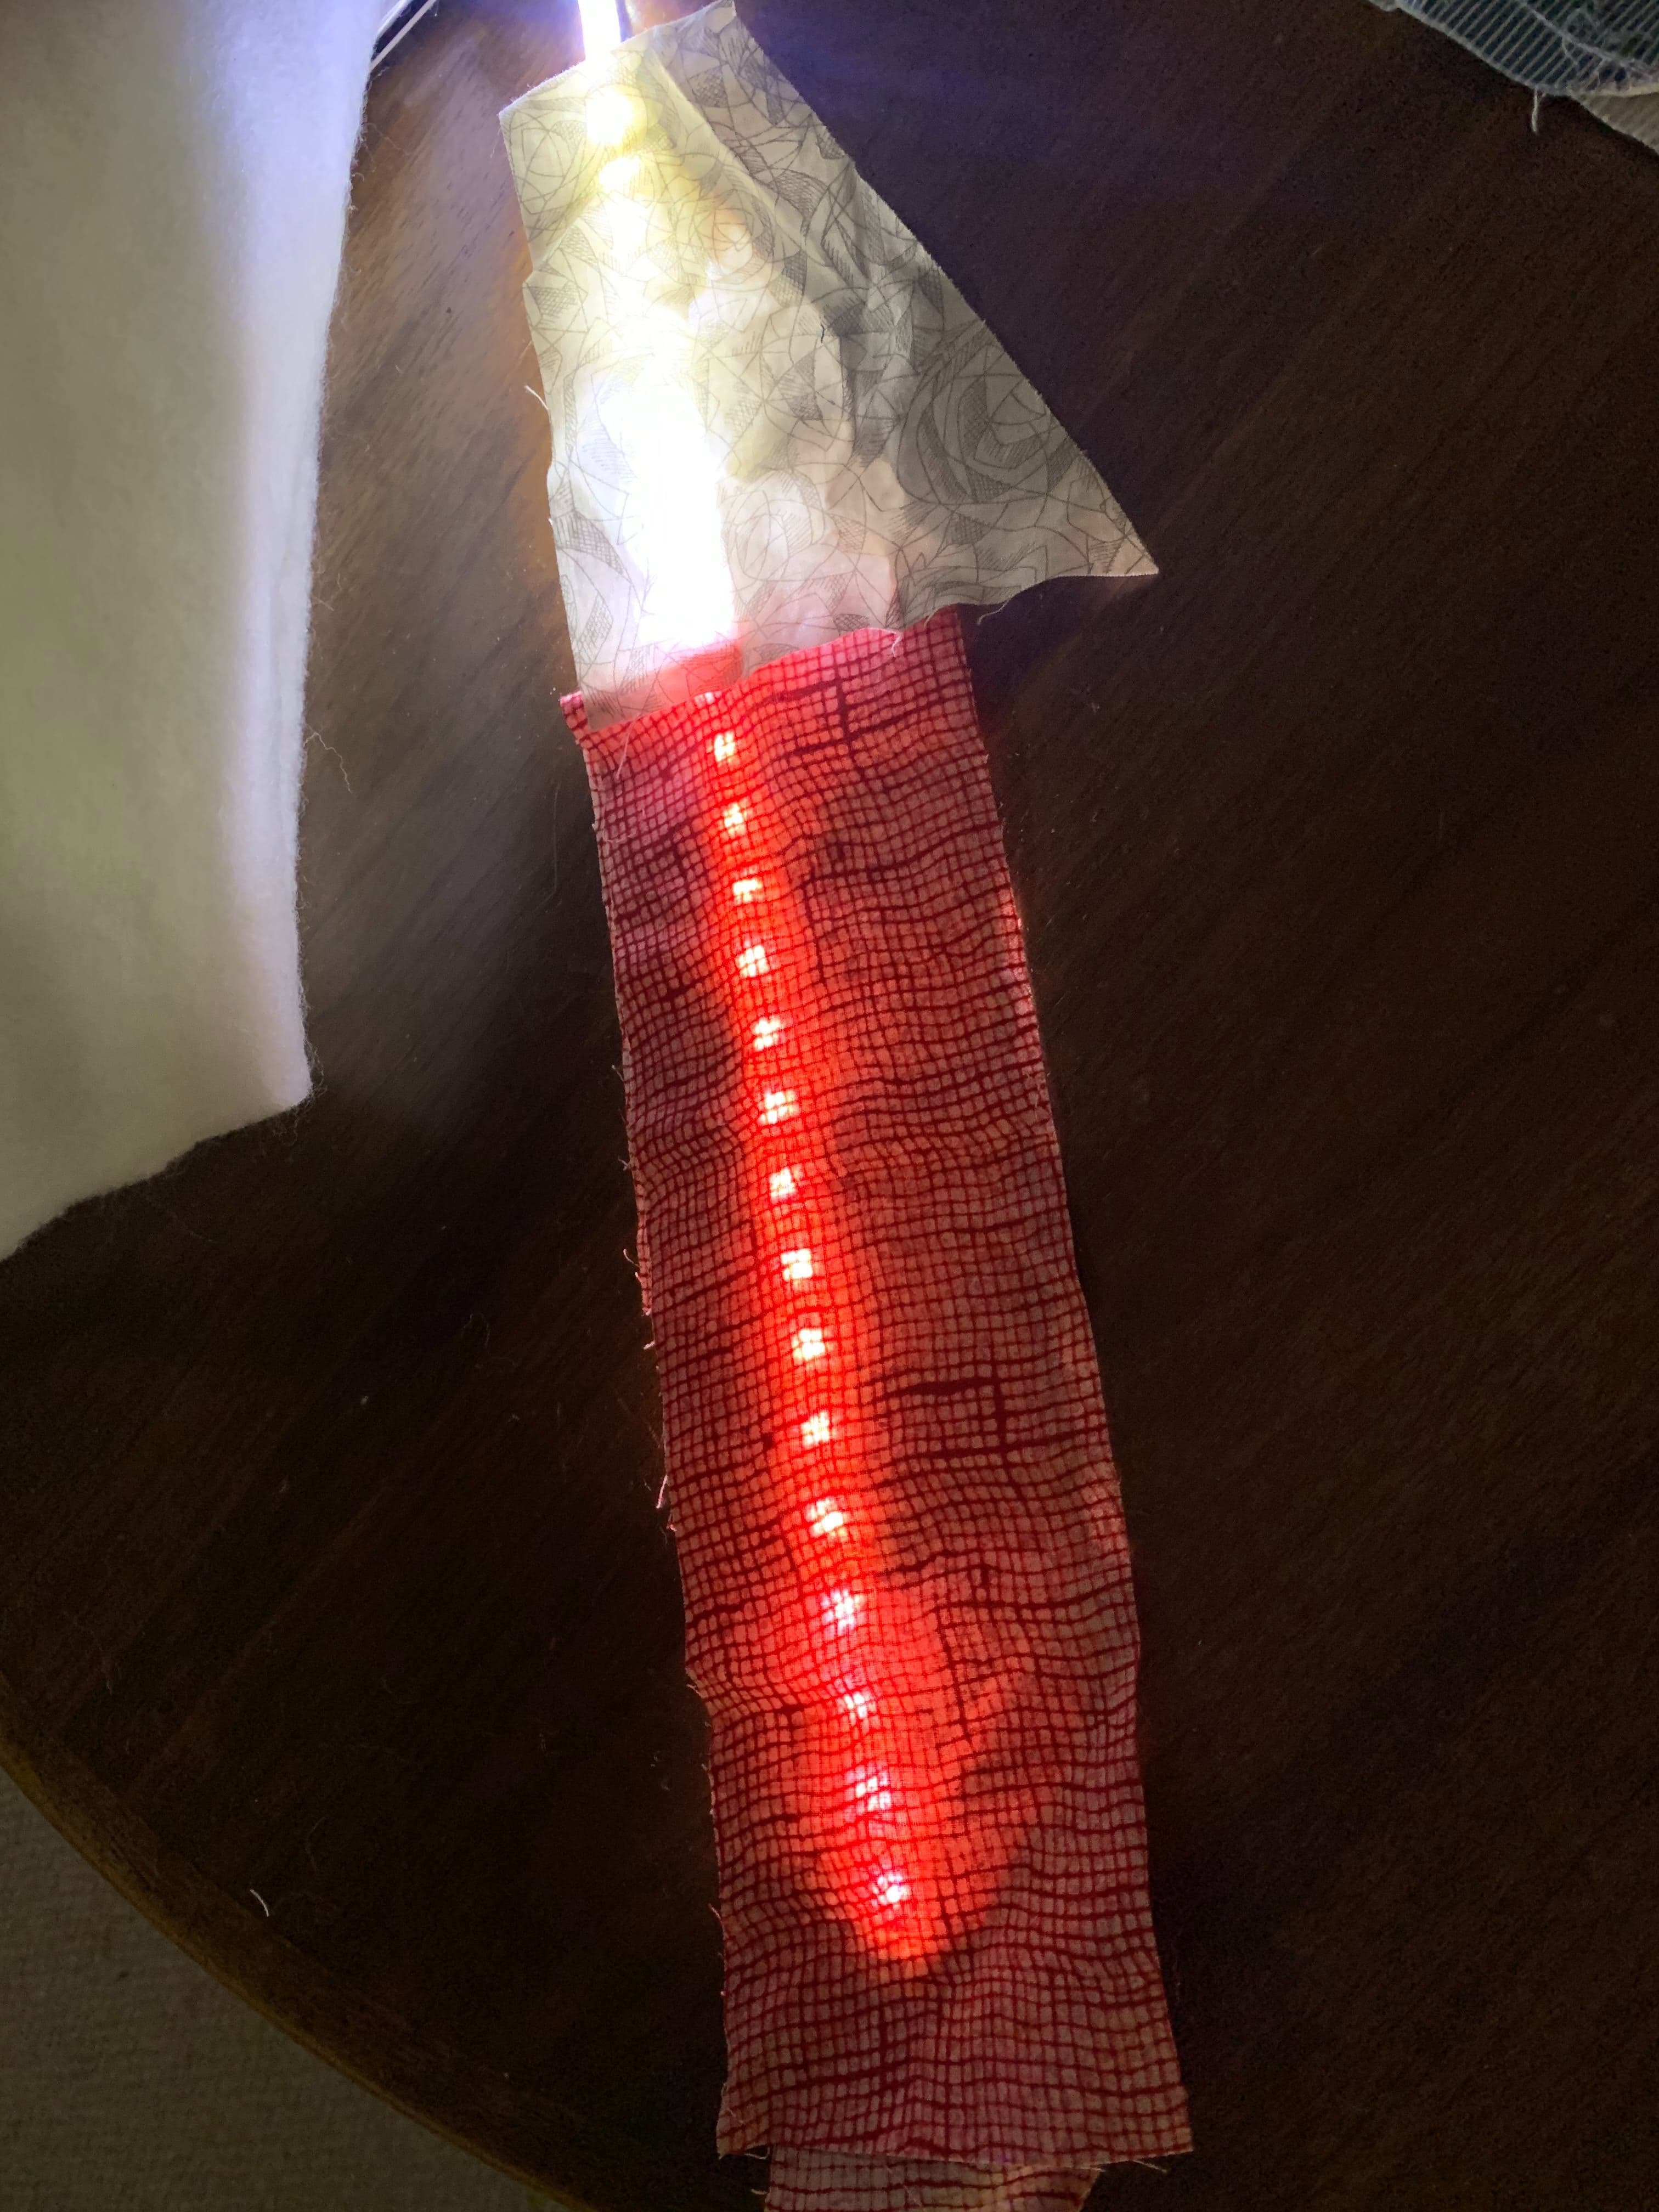 a combination of some dotted lights in red fabric and more diffuse white fabric